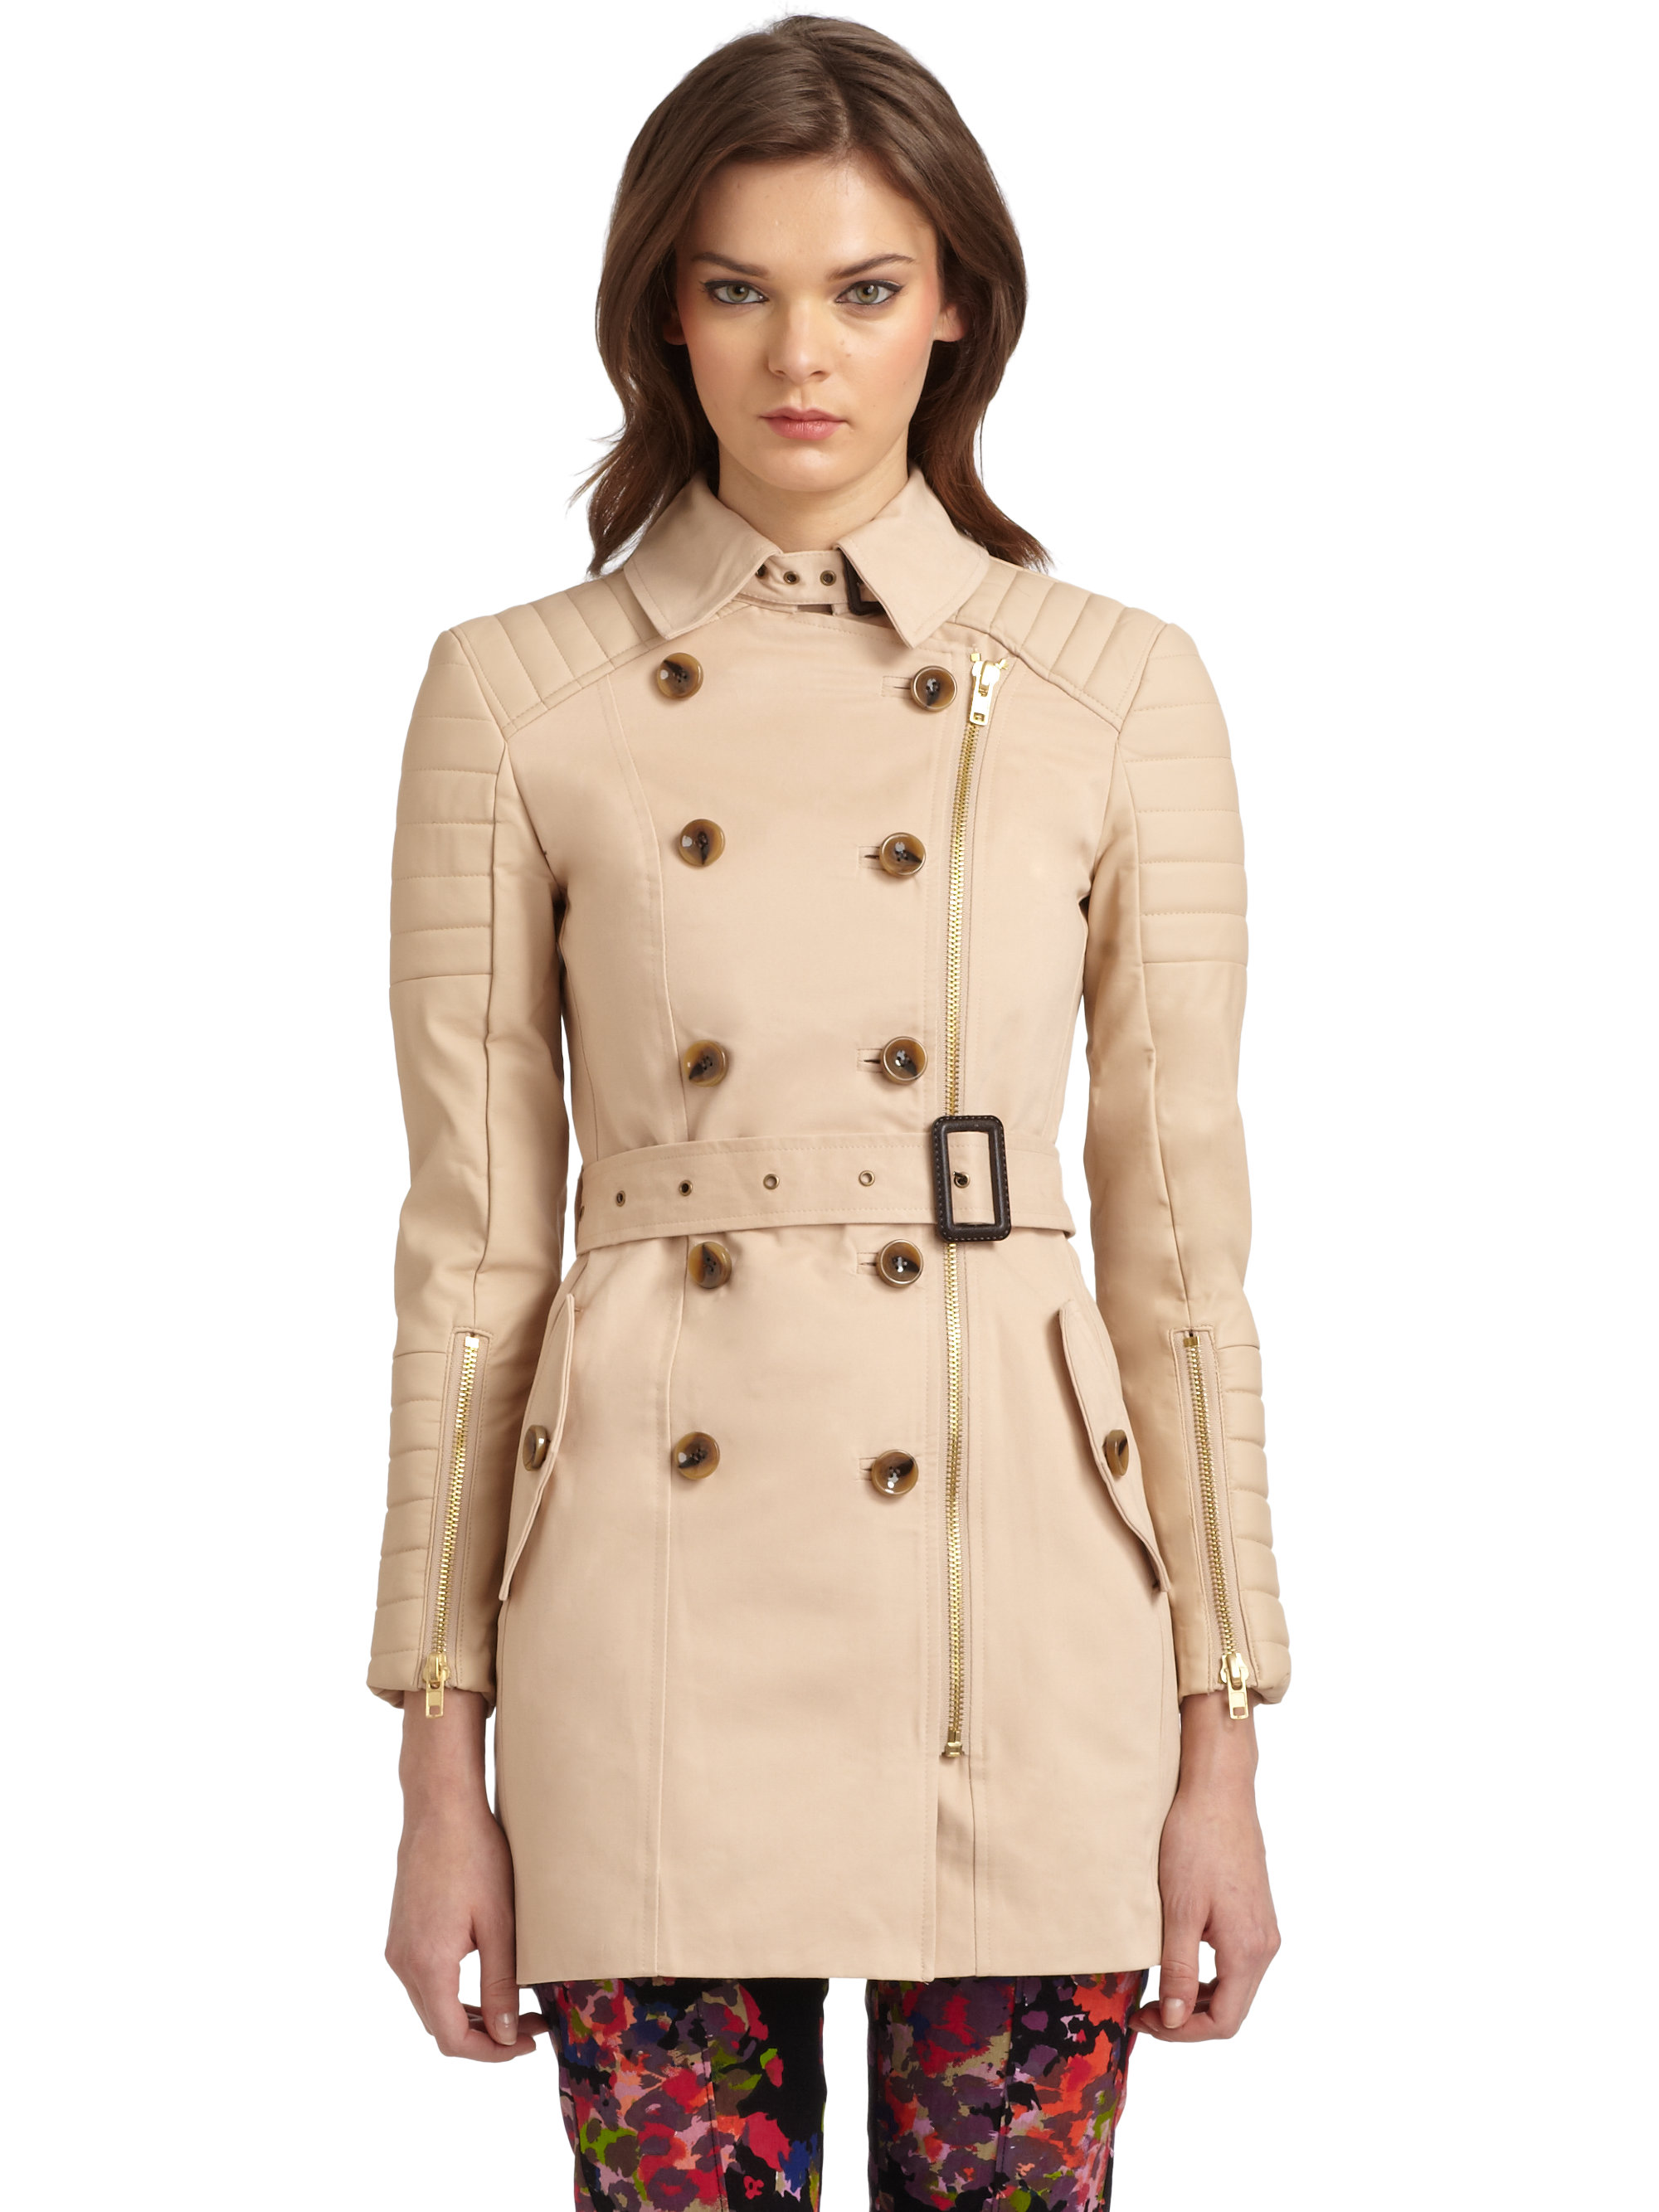 Lyst - W118 By Walter Baker Keanu Mixedmedia Trench Coat in Natural